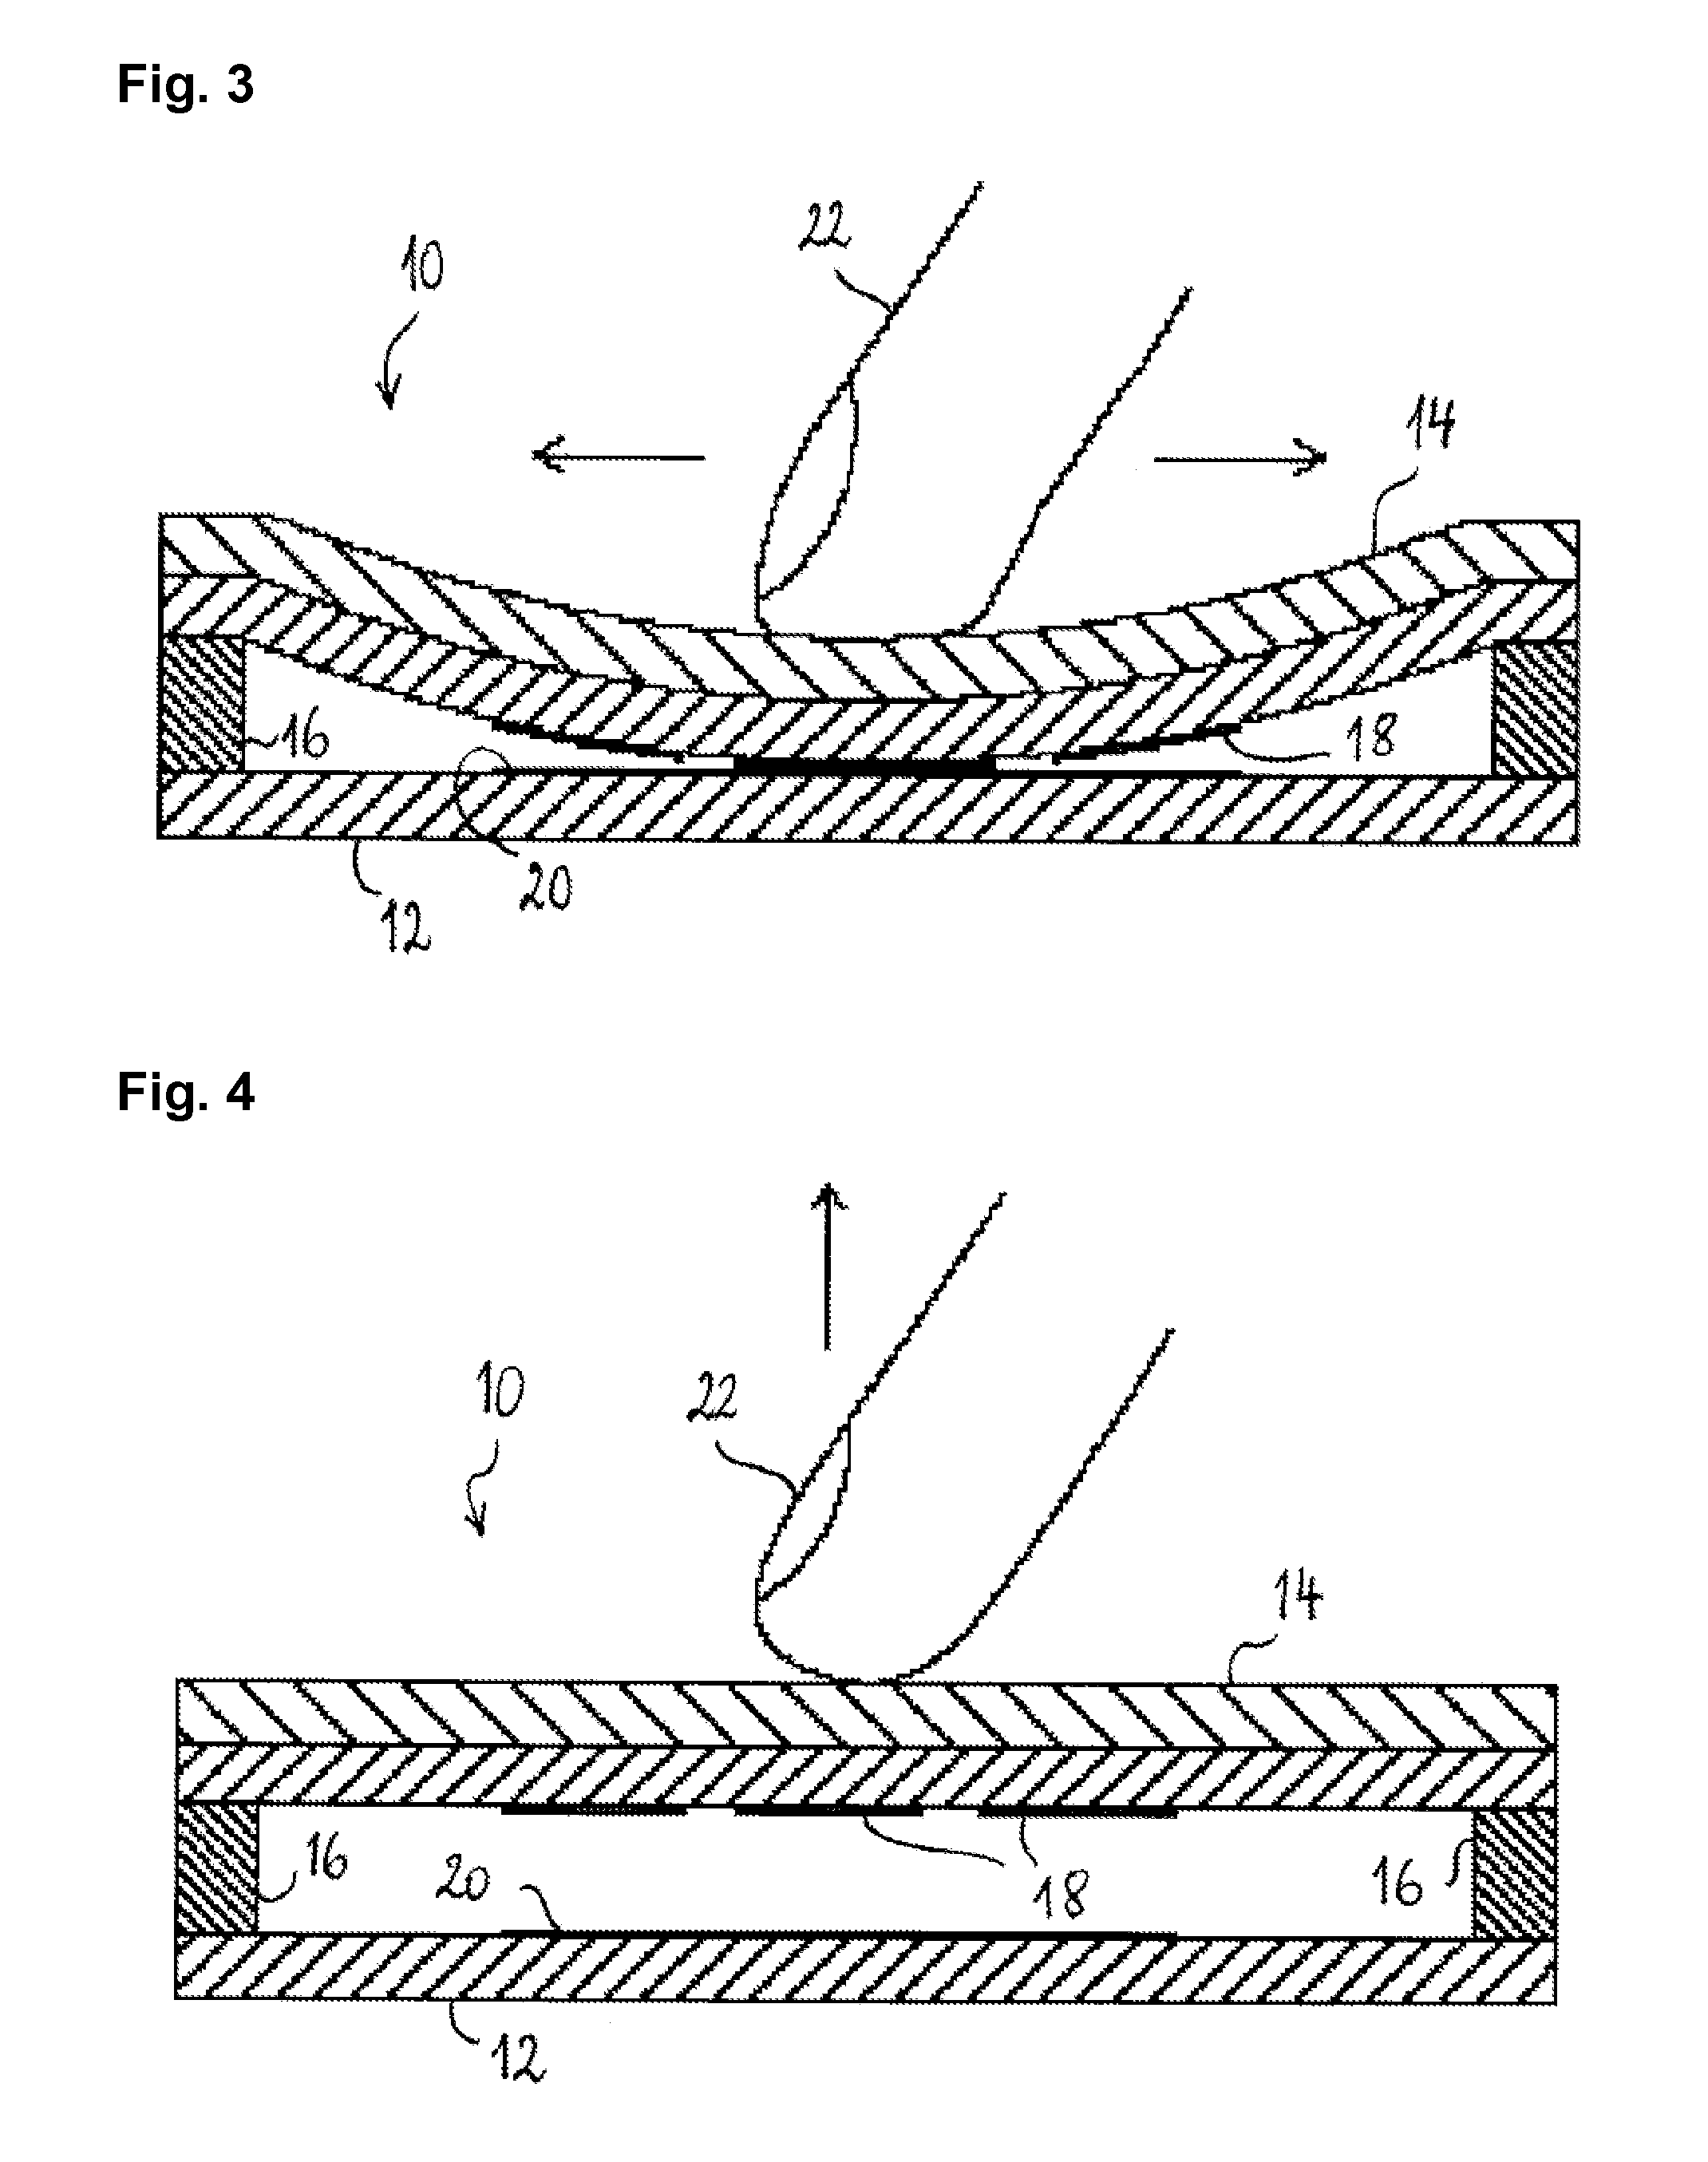 Touchpad with strip-shaped input area